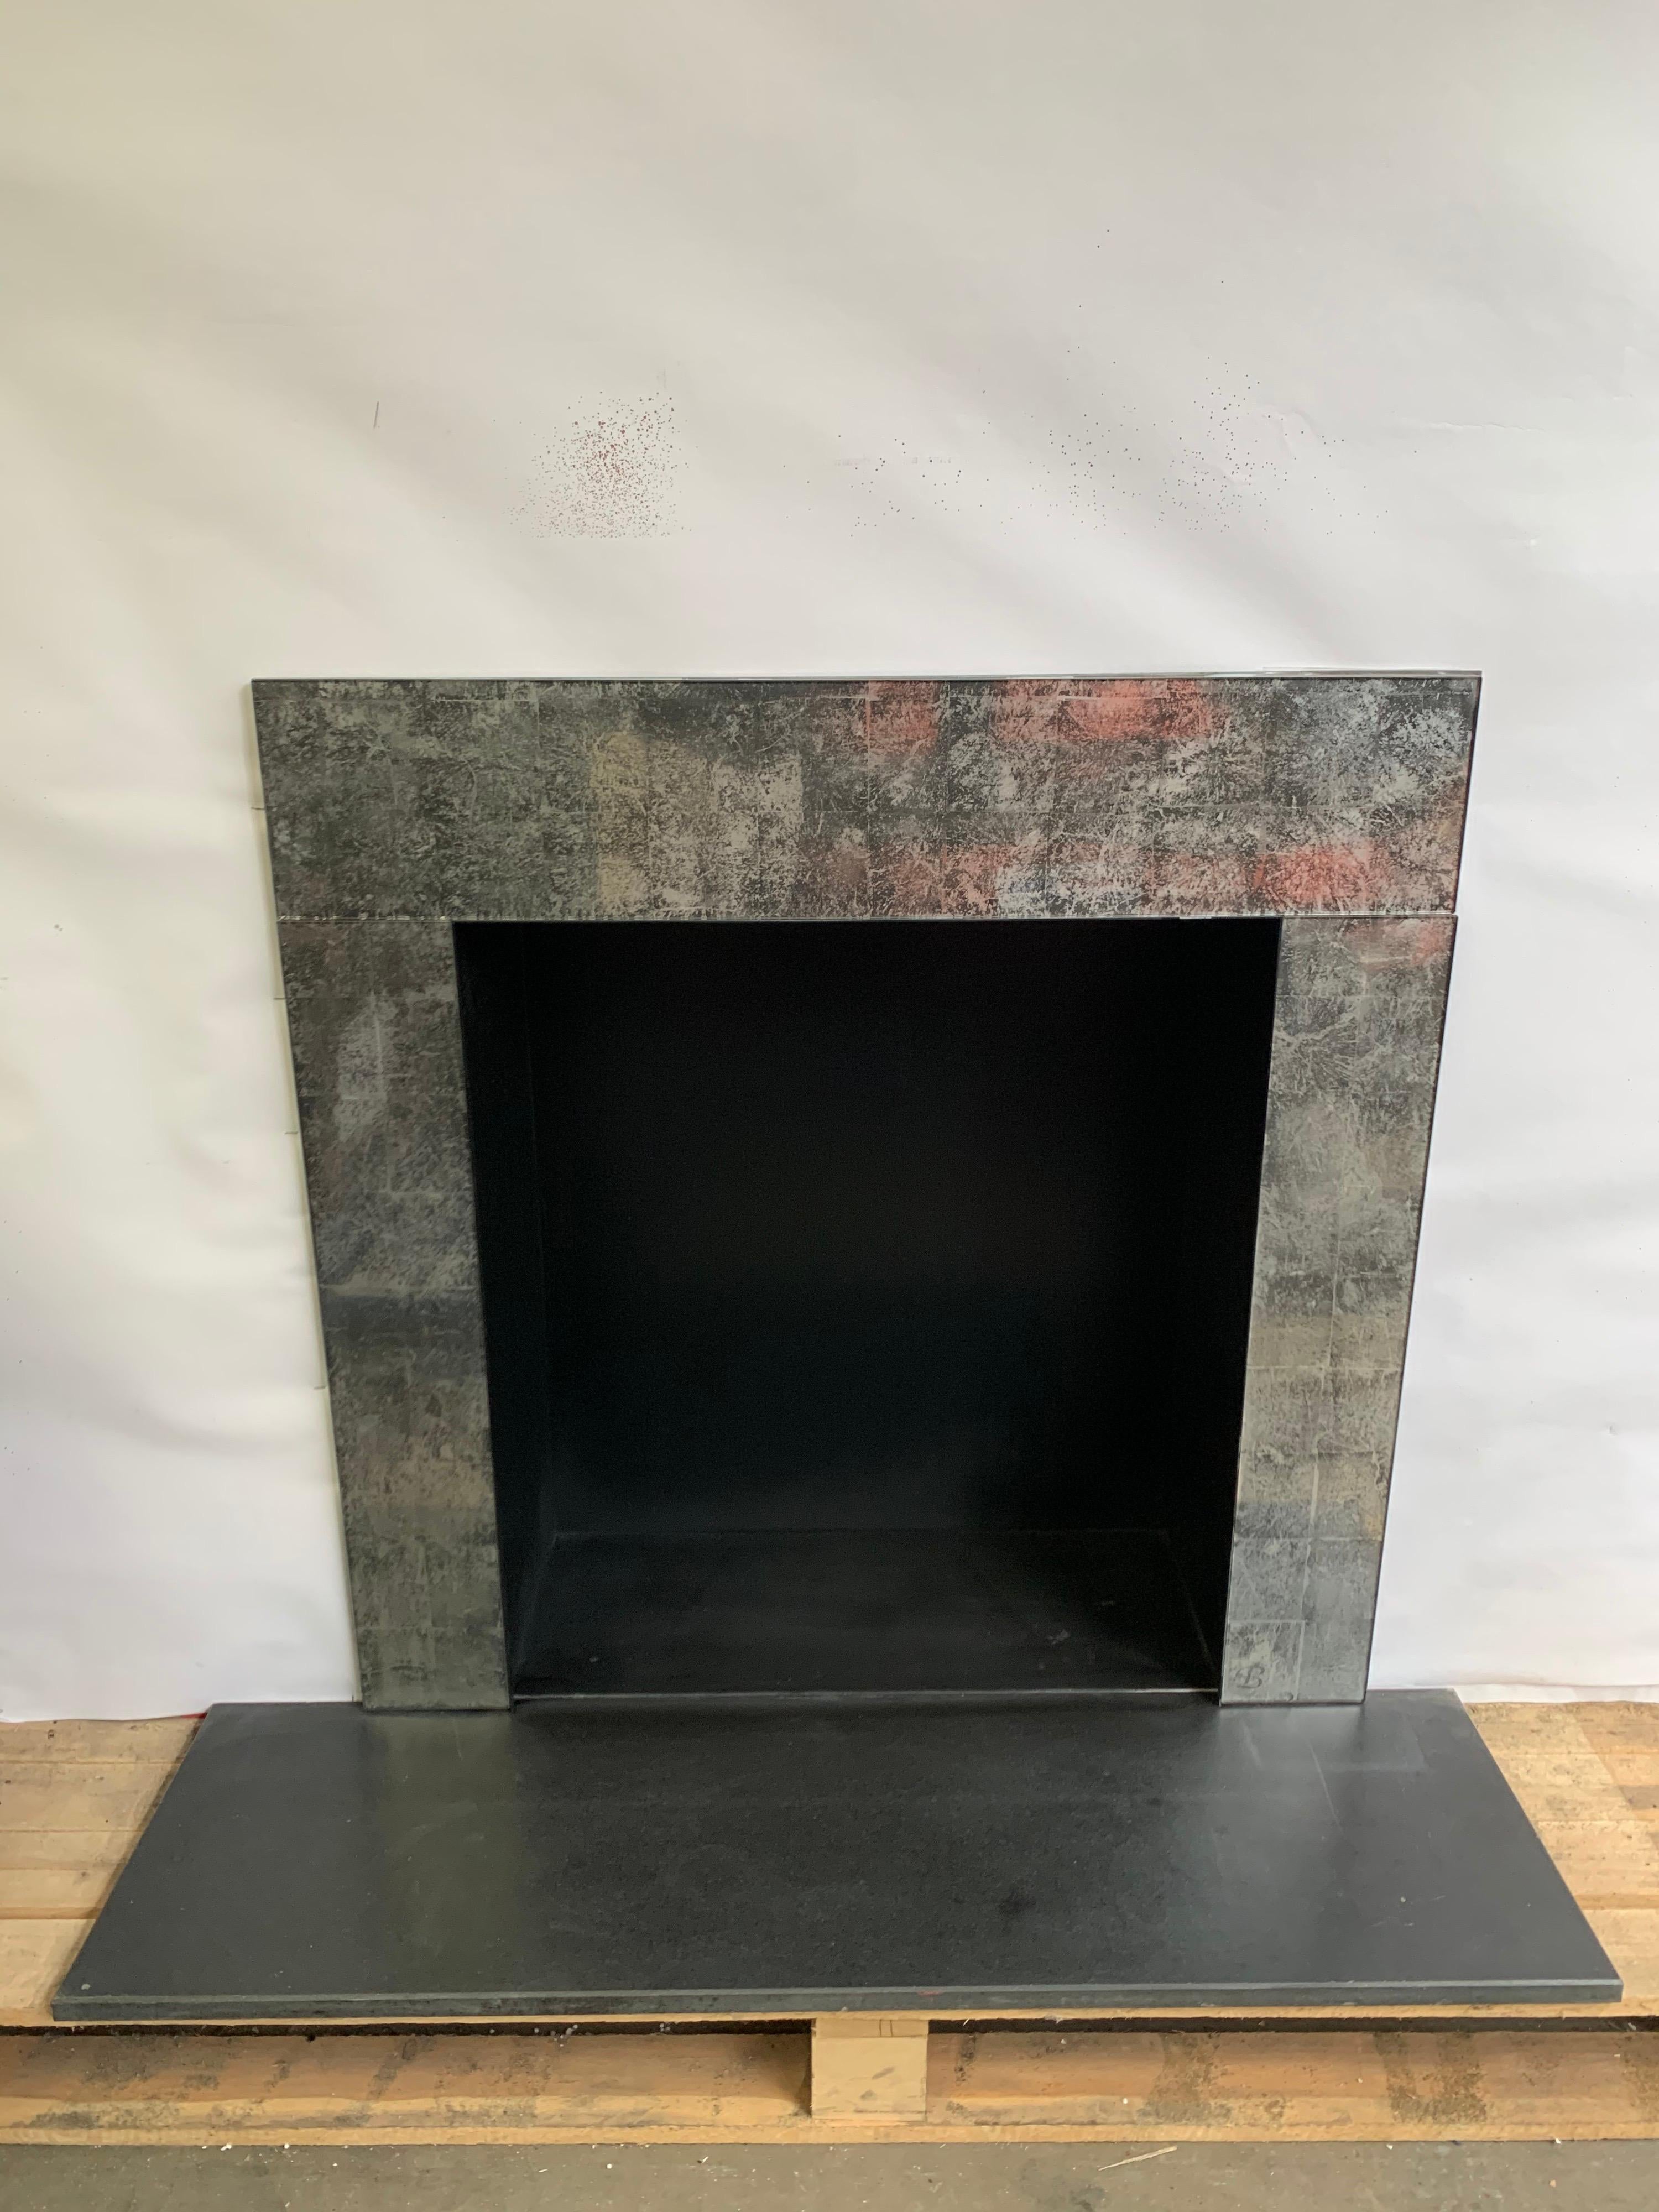 21st century antique glass & steel fireplace insert 
Hand made antique glass slips frame with black steel back box chamber.
Suitable for, gas fire, bio-ethanol fire or decorative purpose.
Unique one of a kind

Measures: Outside frame width 40